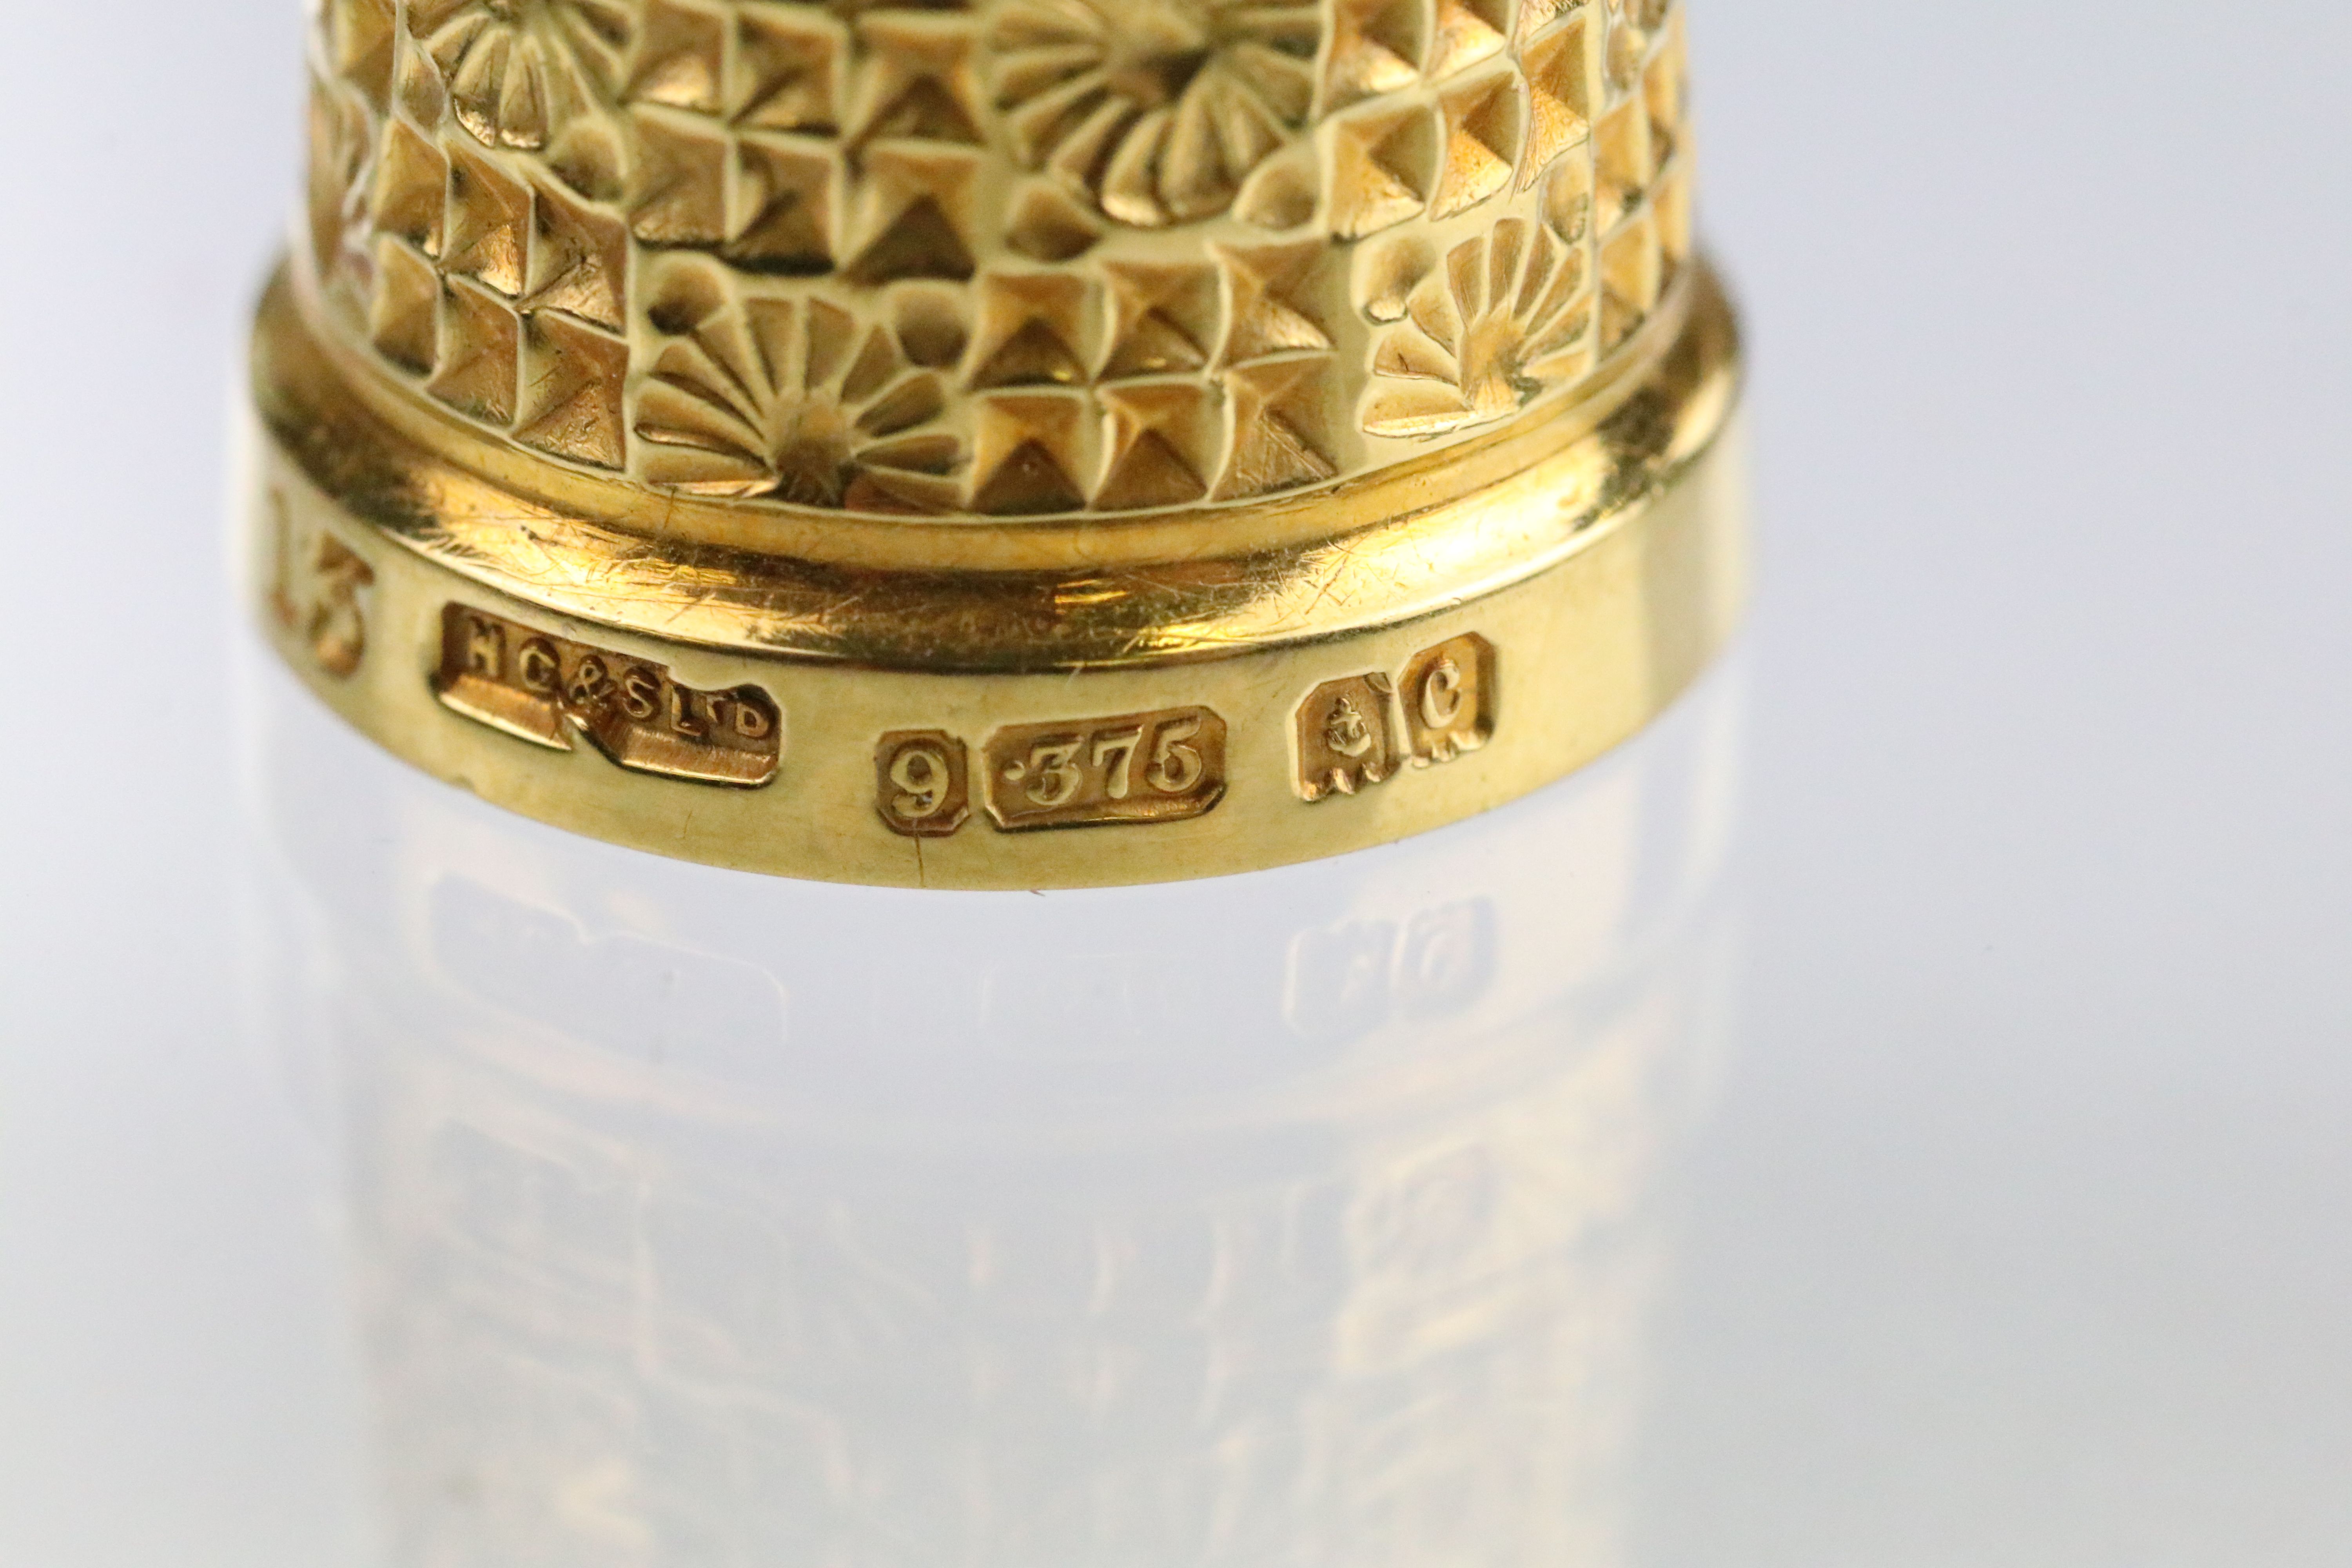 9ct gold hallmarked thimble with moulded details, size 15. Hallmarked Birmingham 1902, HG & S Ltd. - Image 4 of 4